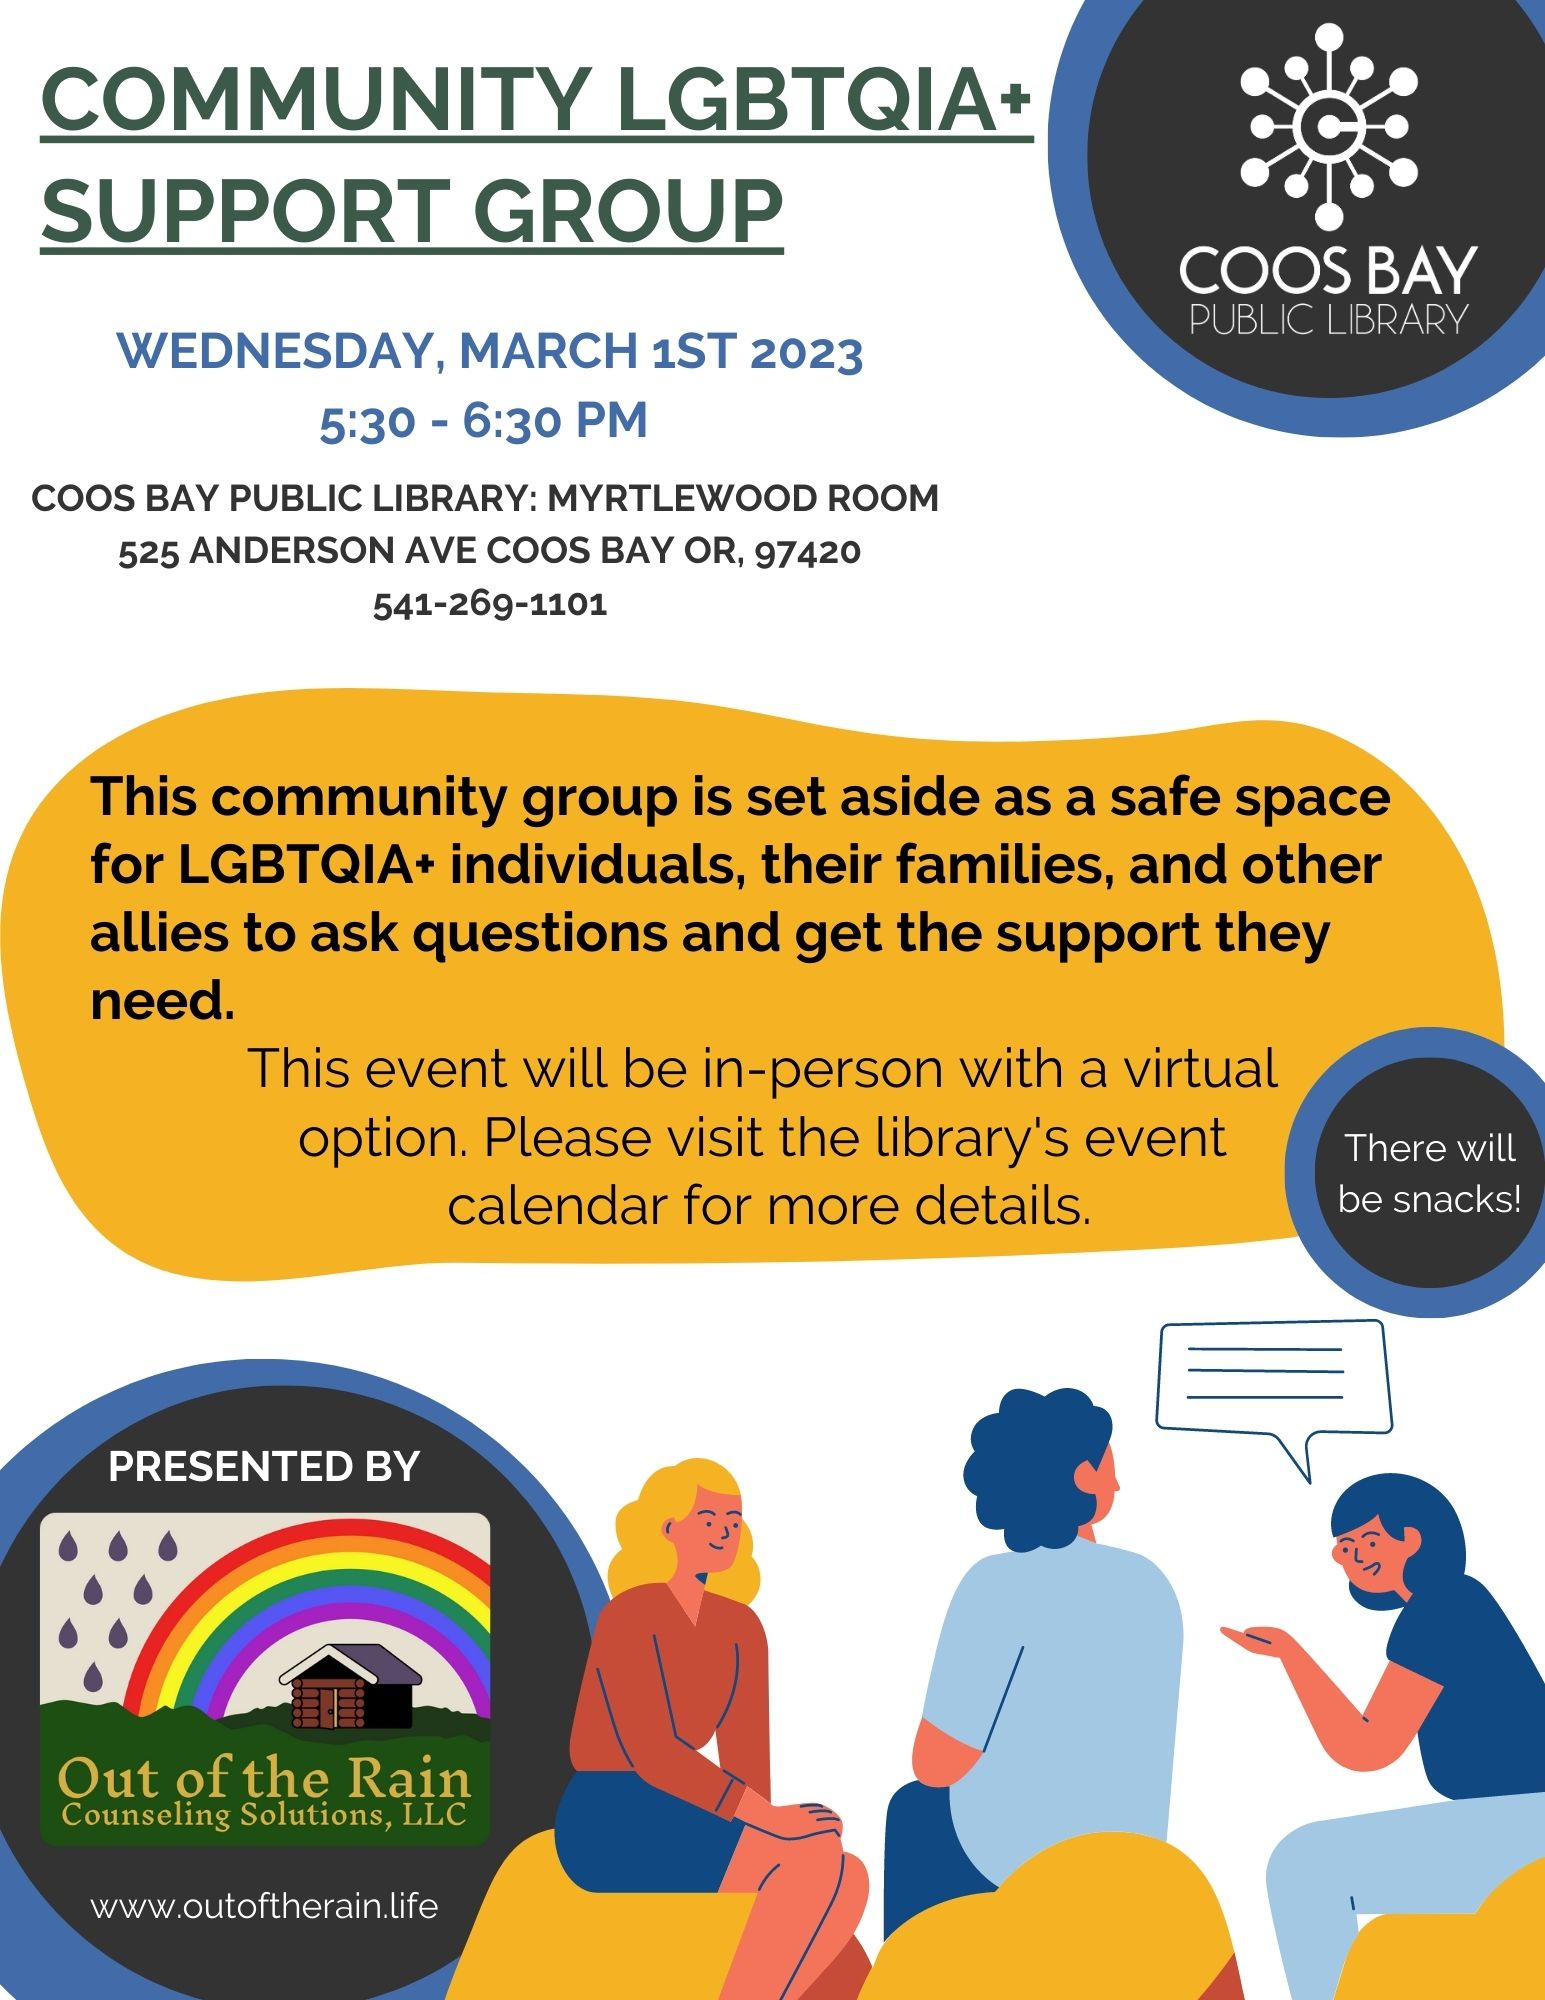 Community LGBTQIA+ Support Group Poster